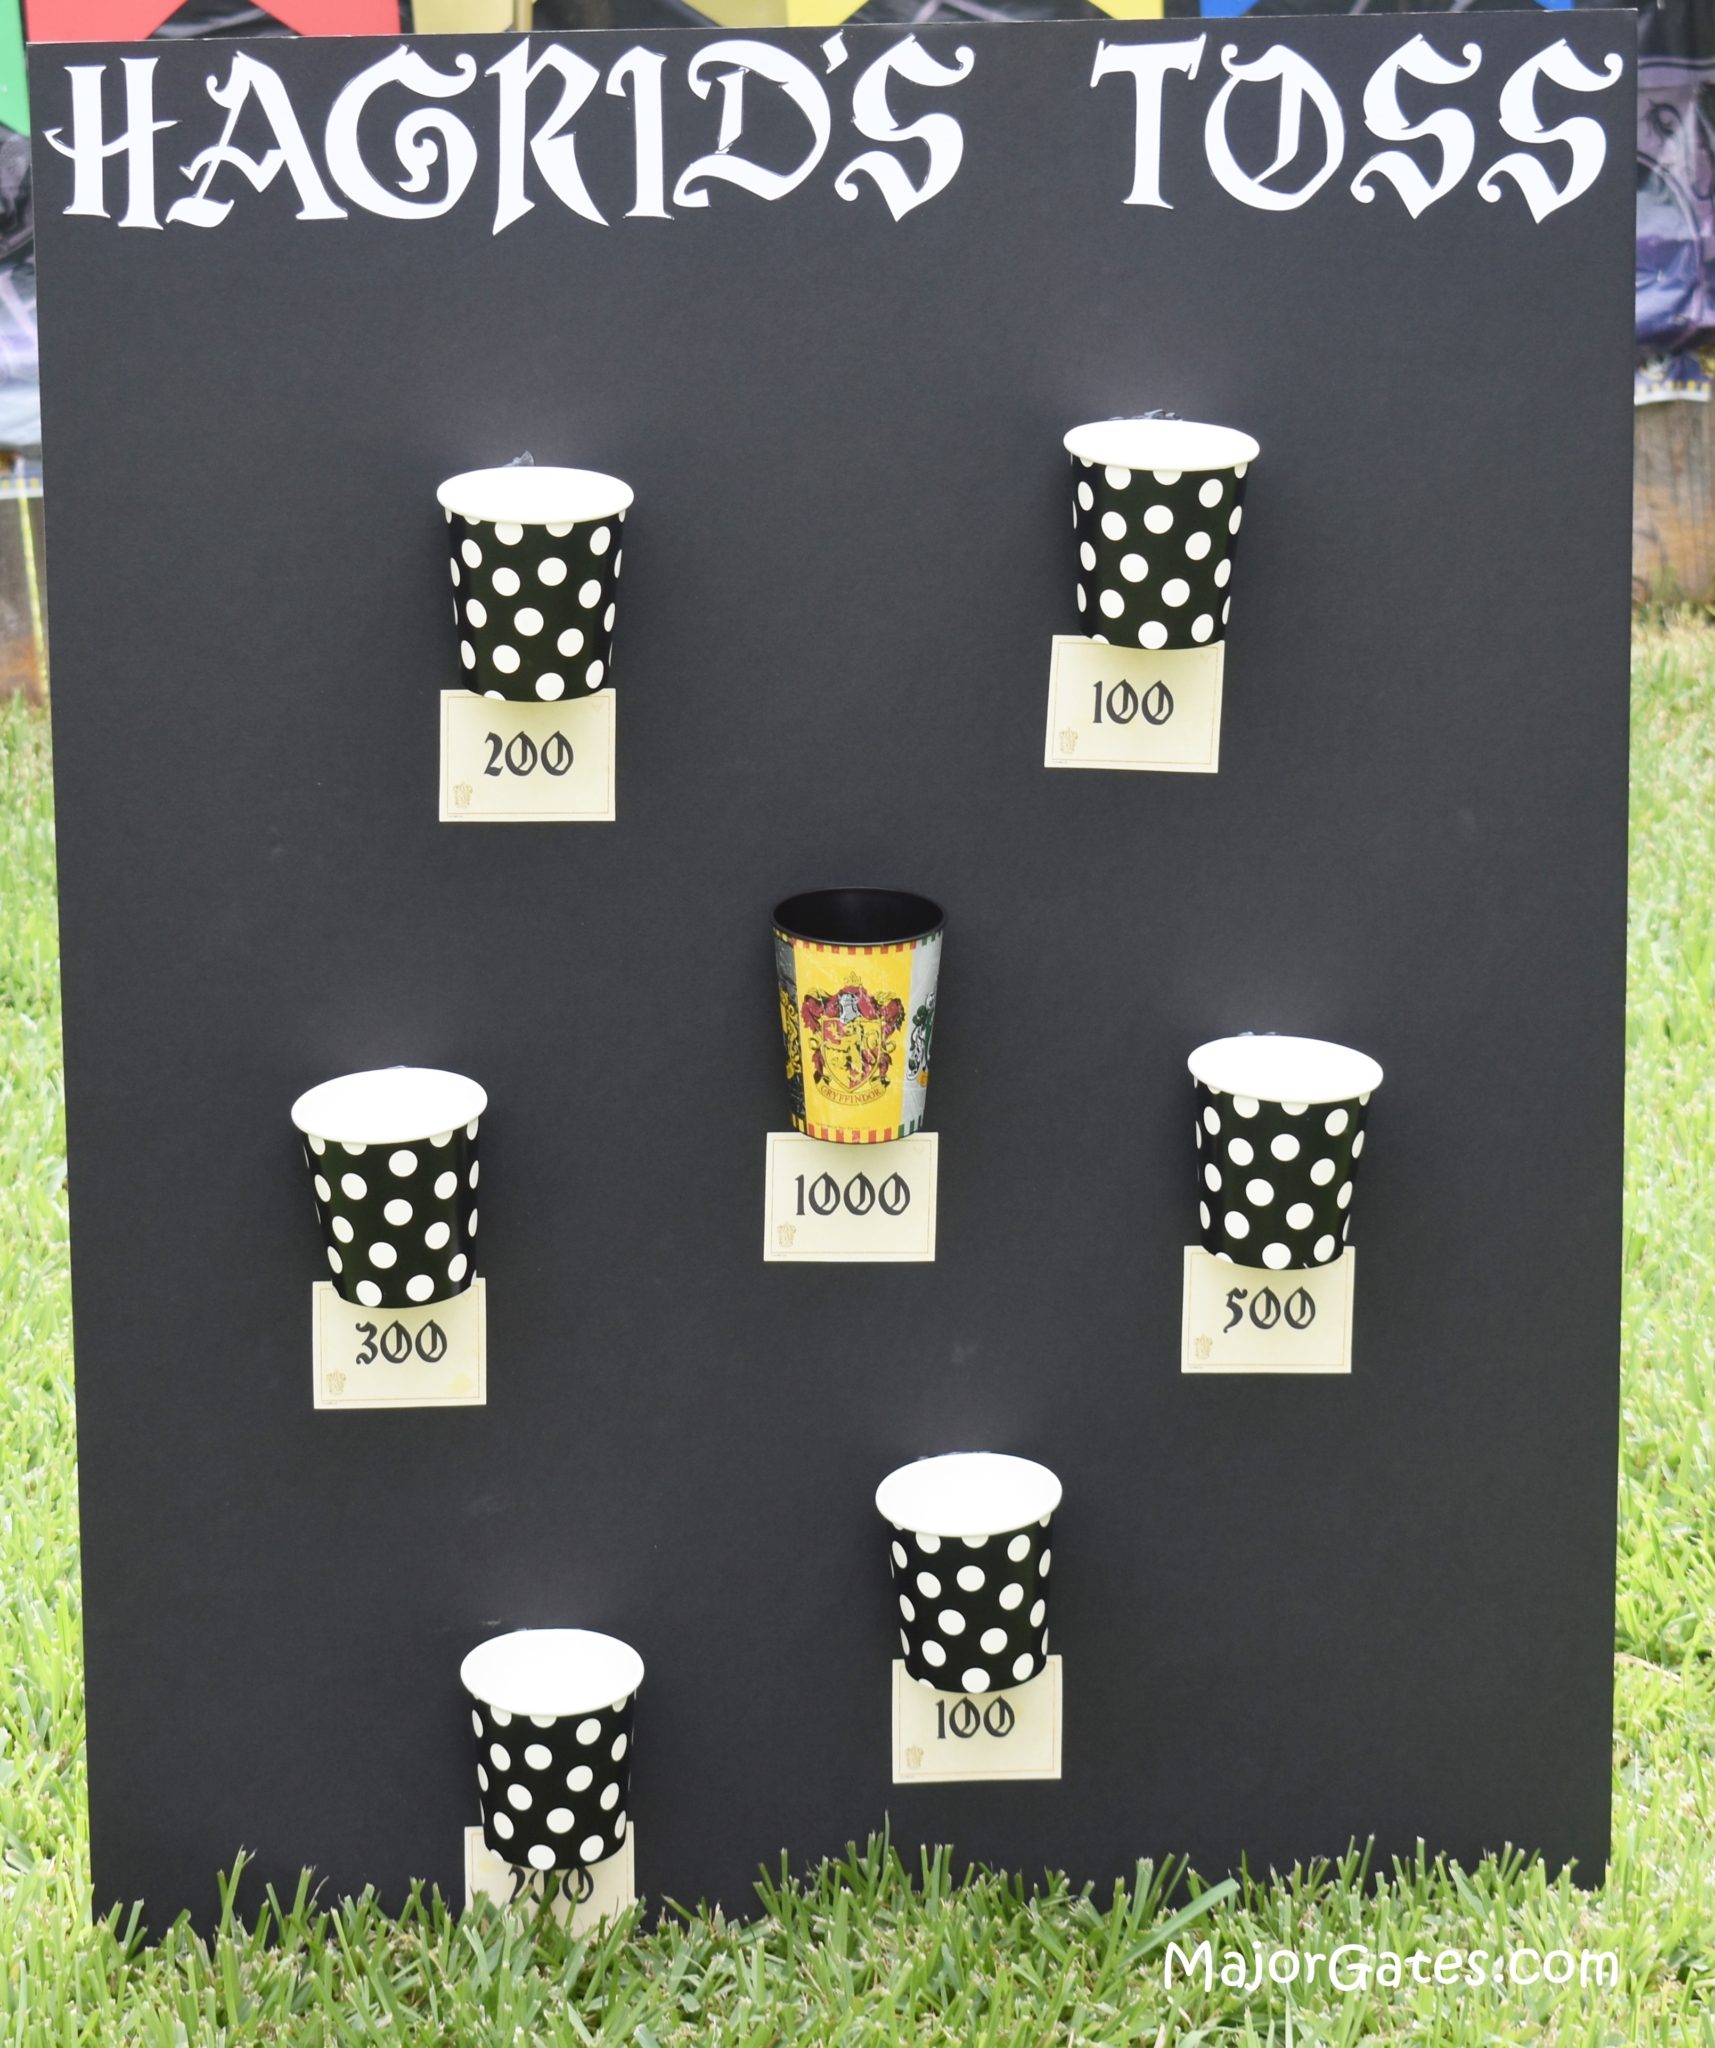 Planning A Harry Potter Party · Major Gates